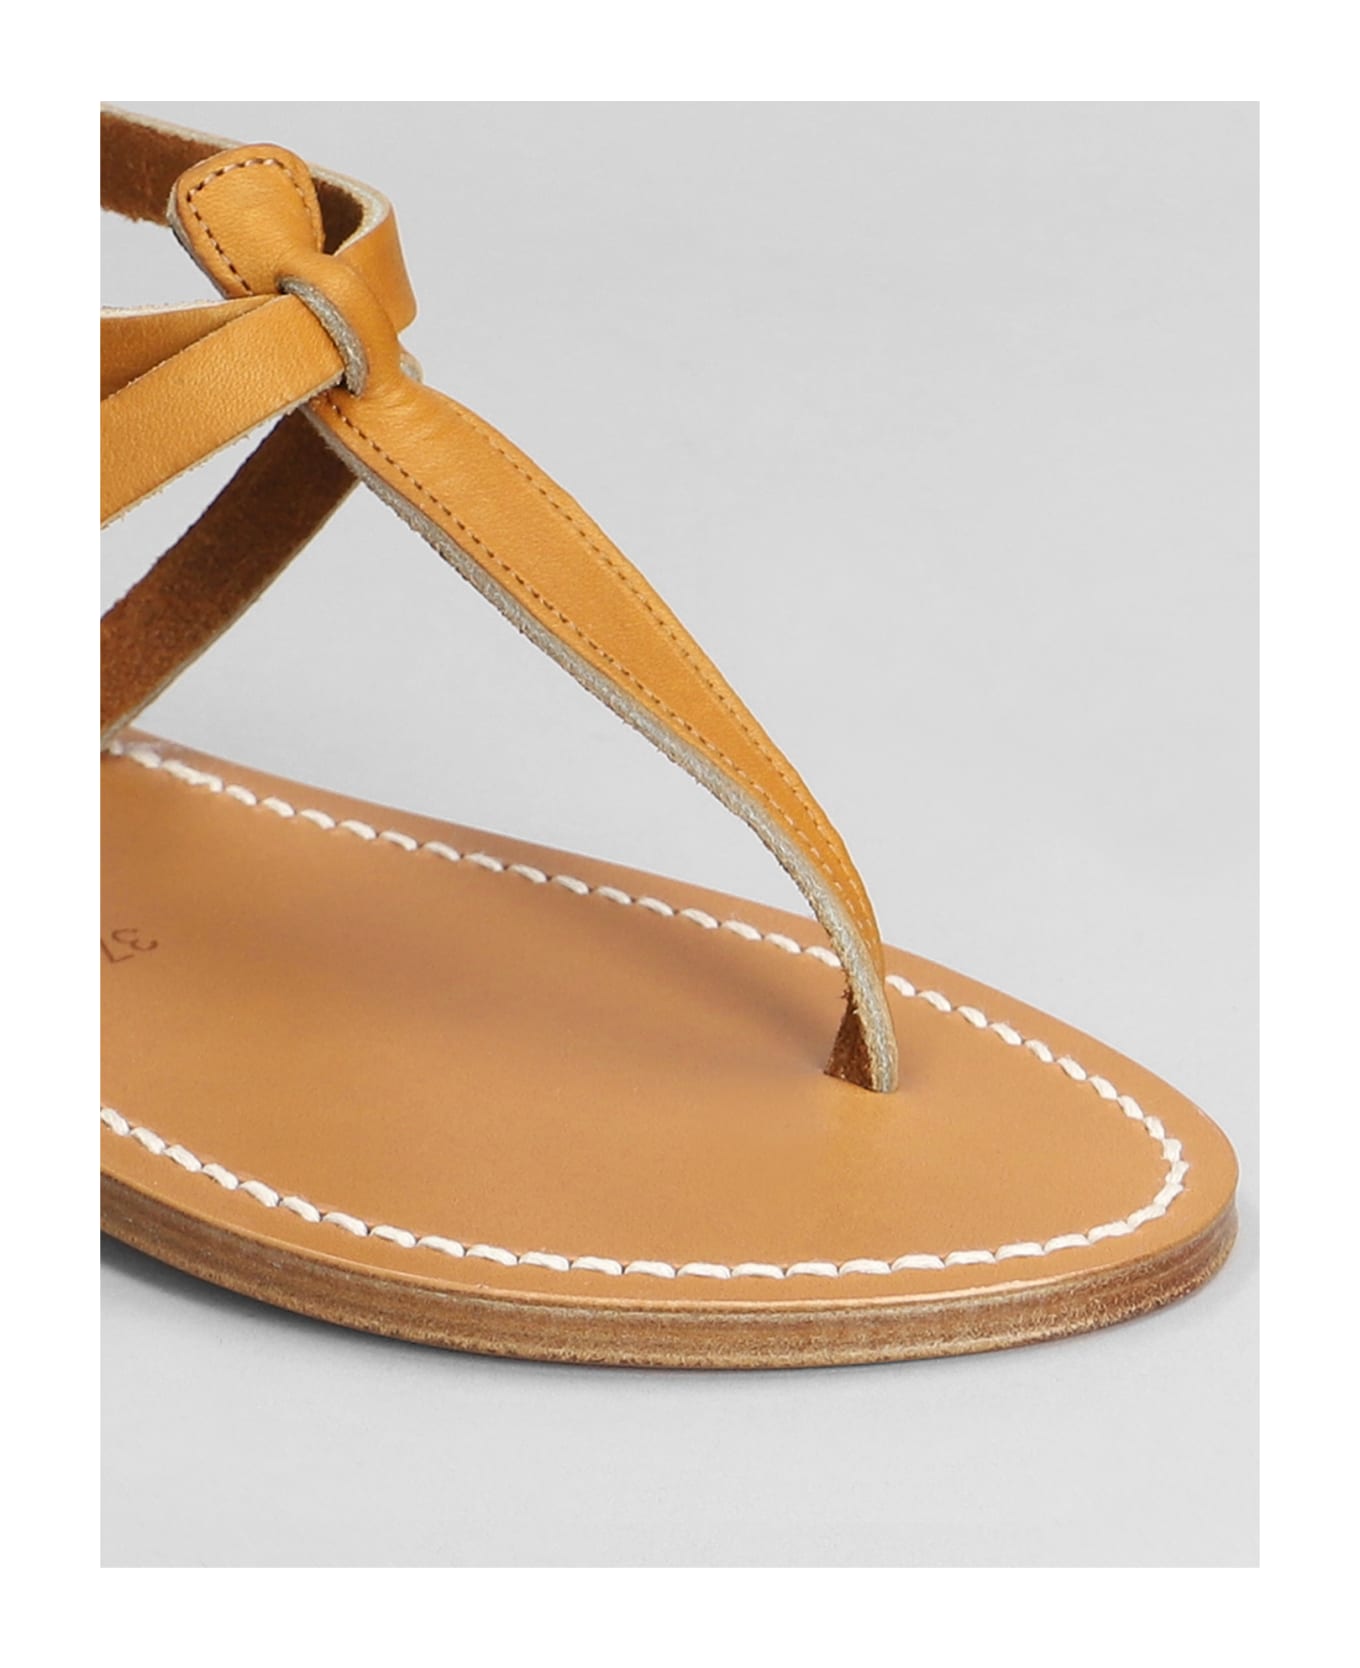 K.Jacques Buffon F Flats In Leather Color Leather - leather color